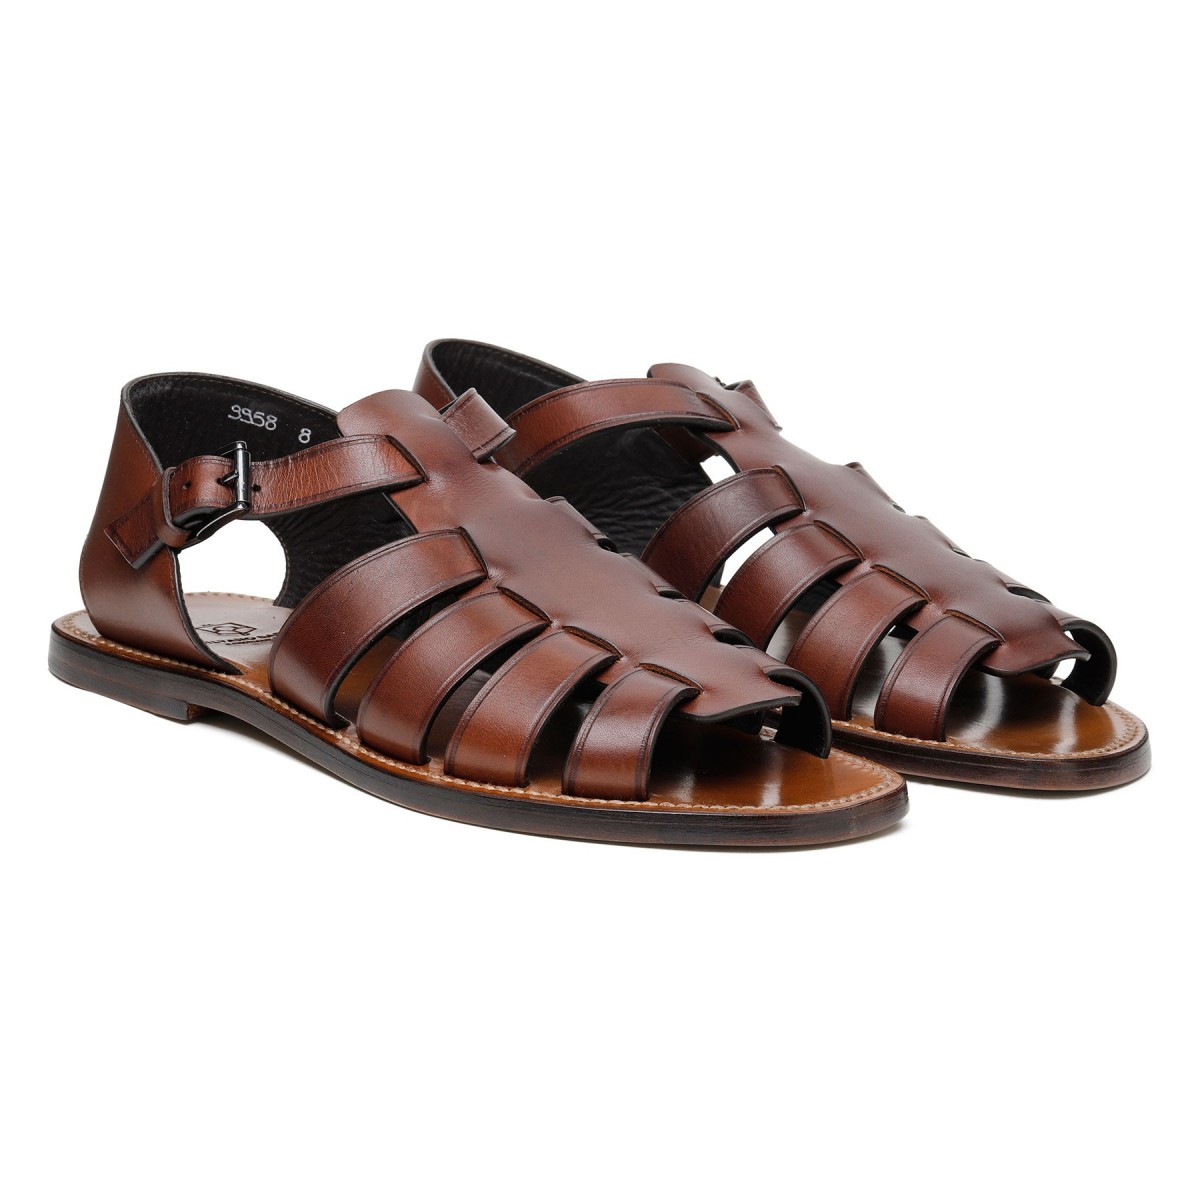 Brown leather gladiator sandals